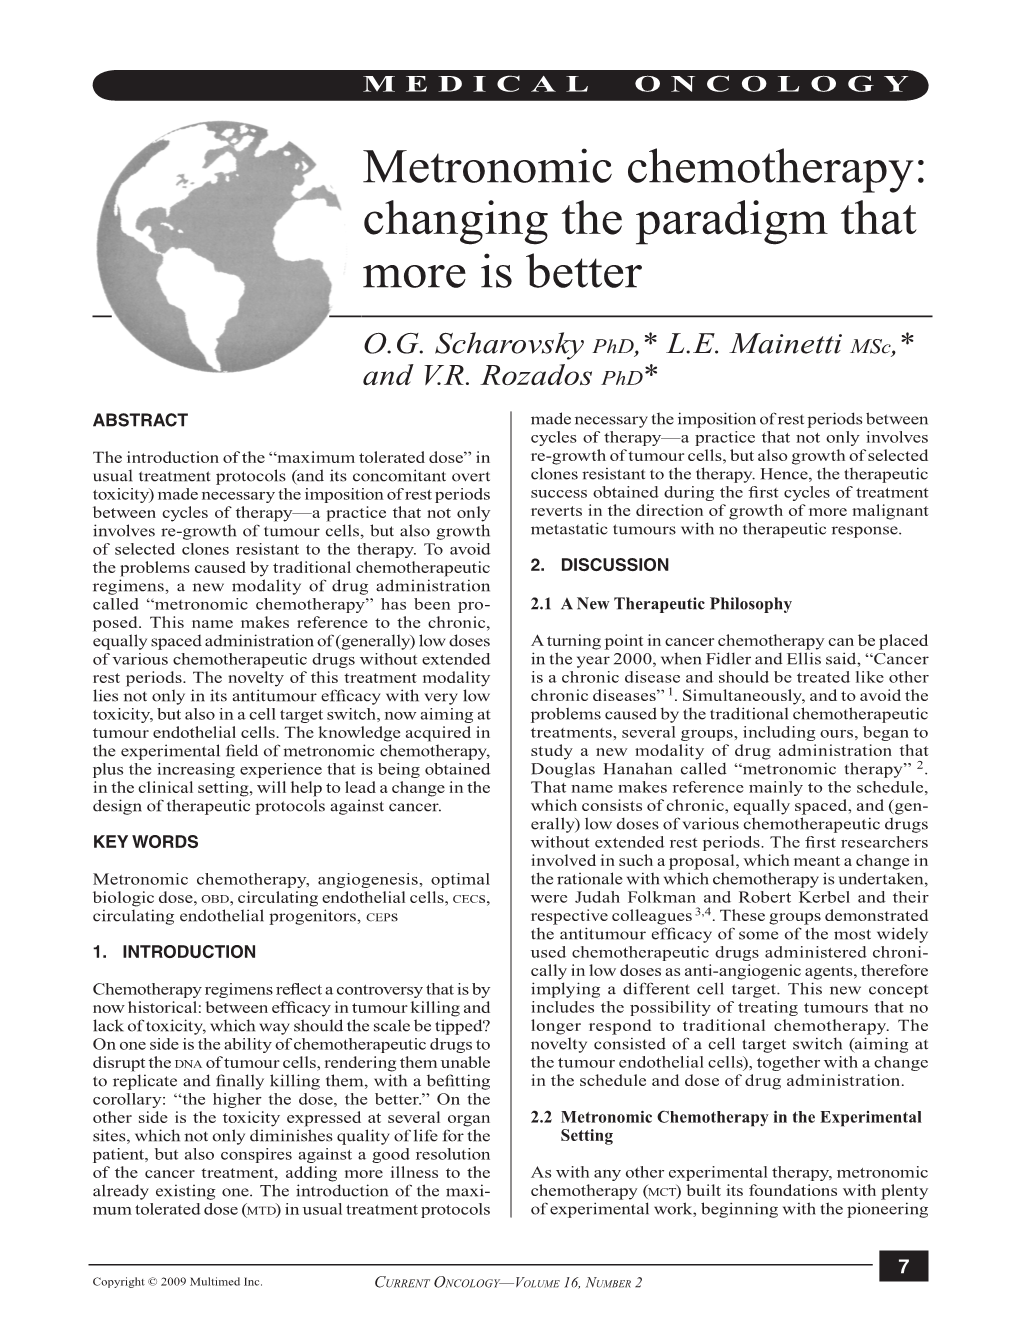 Metronomic Chemotherapy: Changing the Paradigm That More Is Better